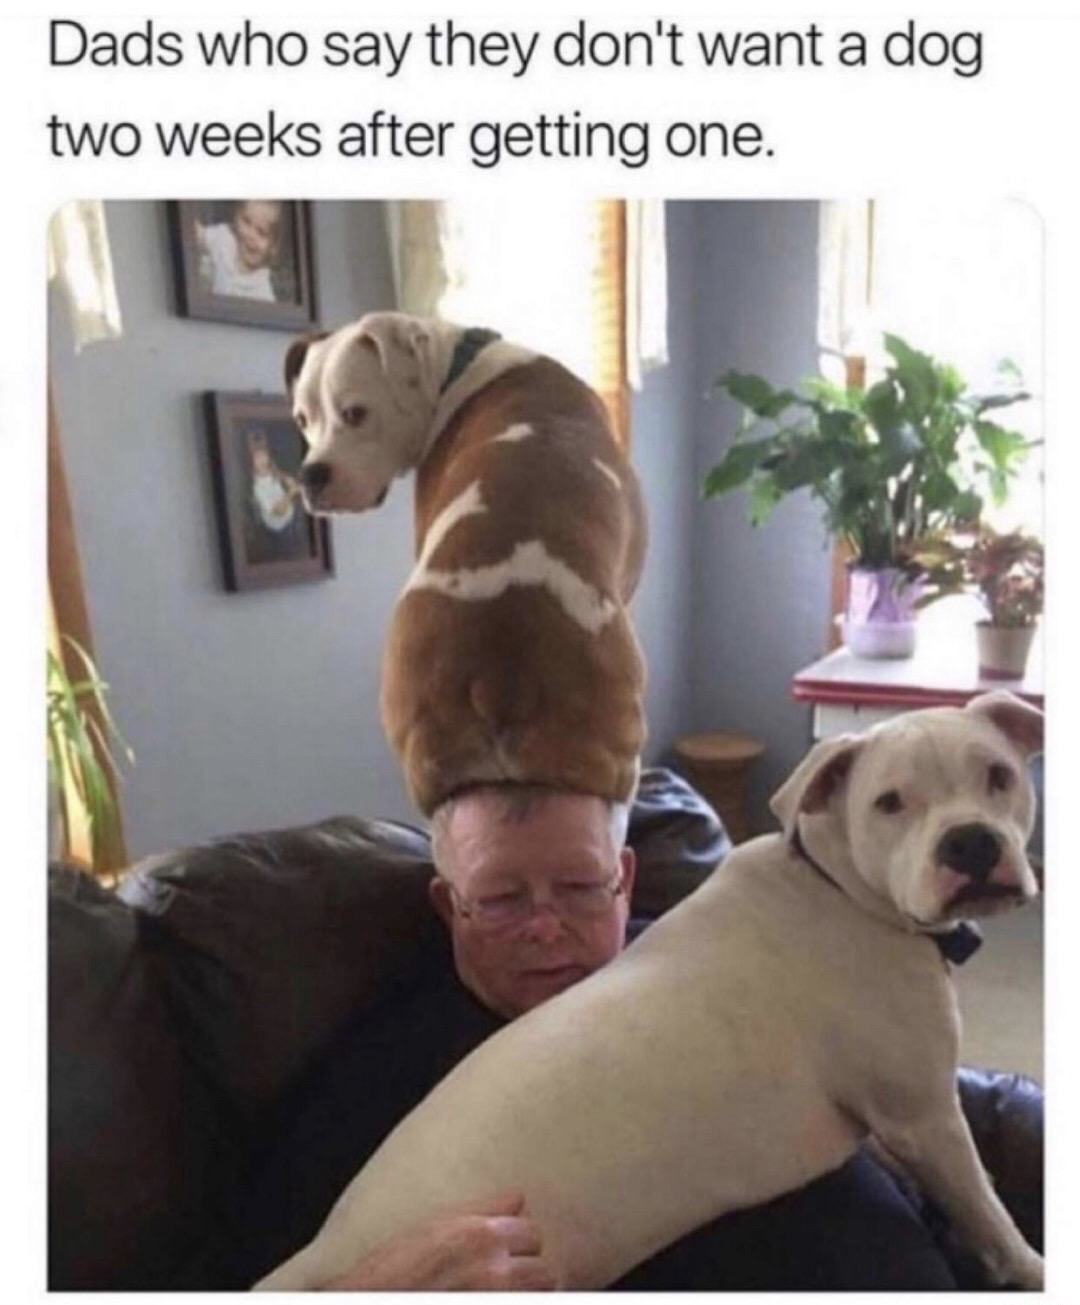 dads and dogs meme - Dads who say they don't want a dog two weeks after getting one.